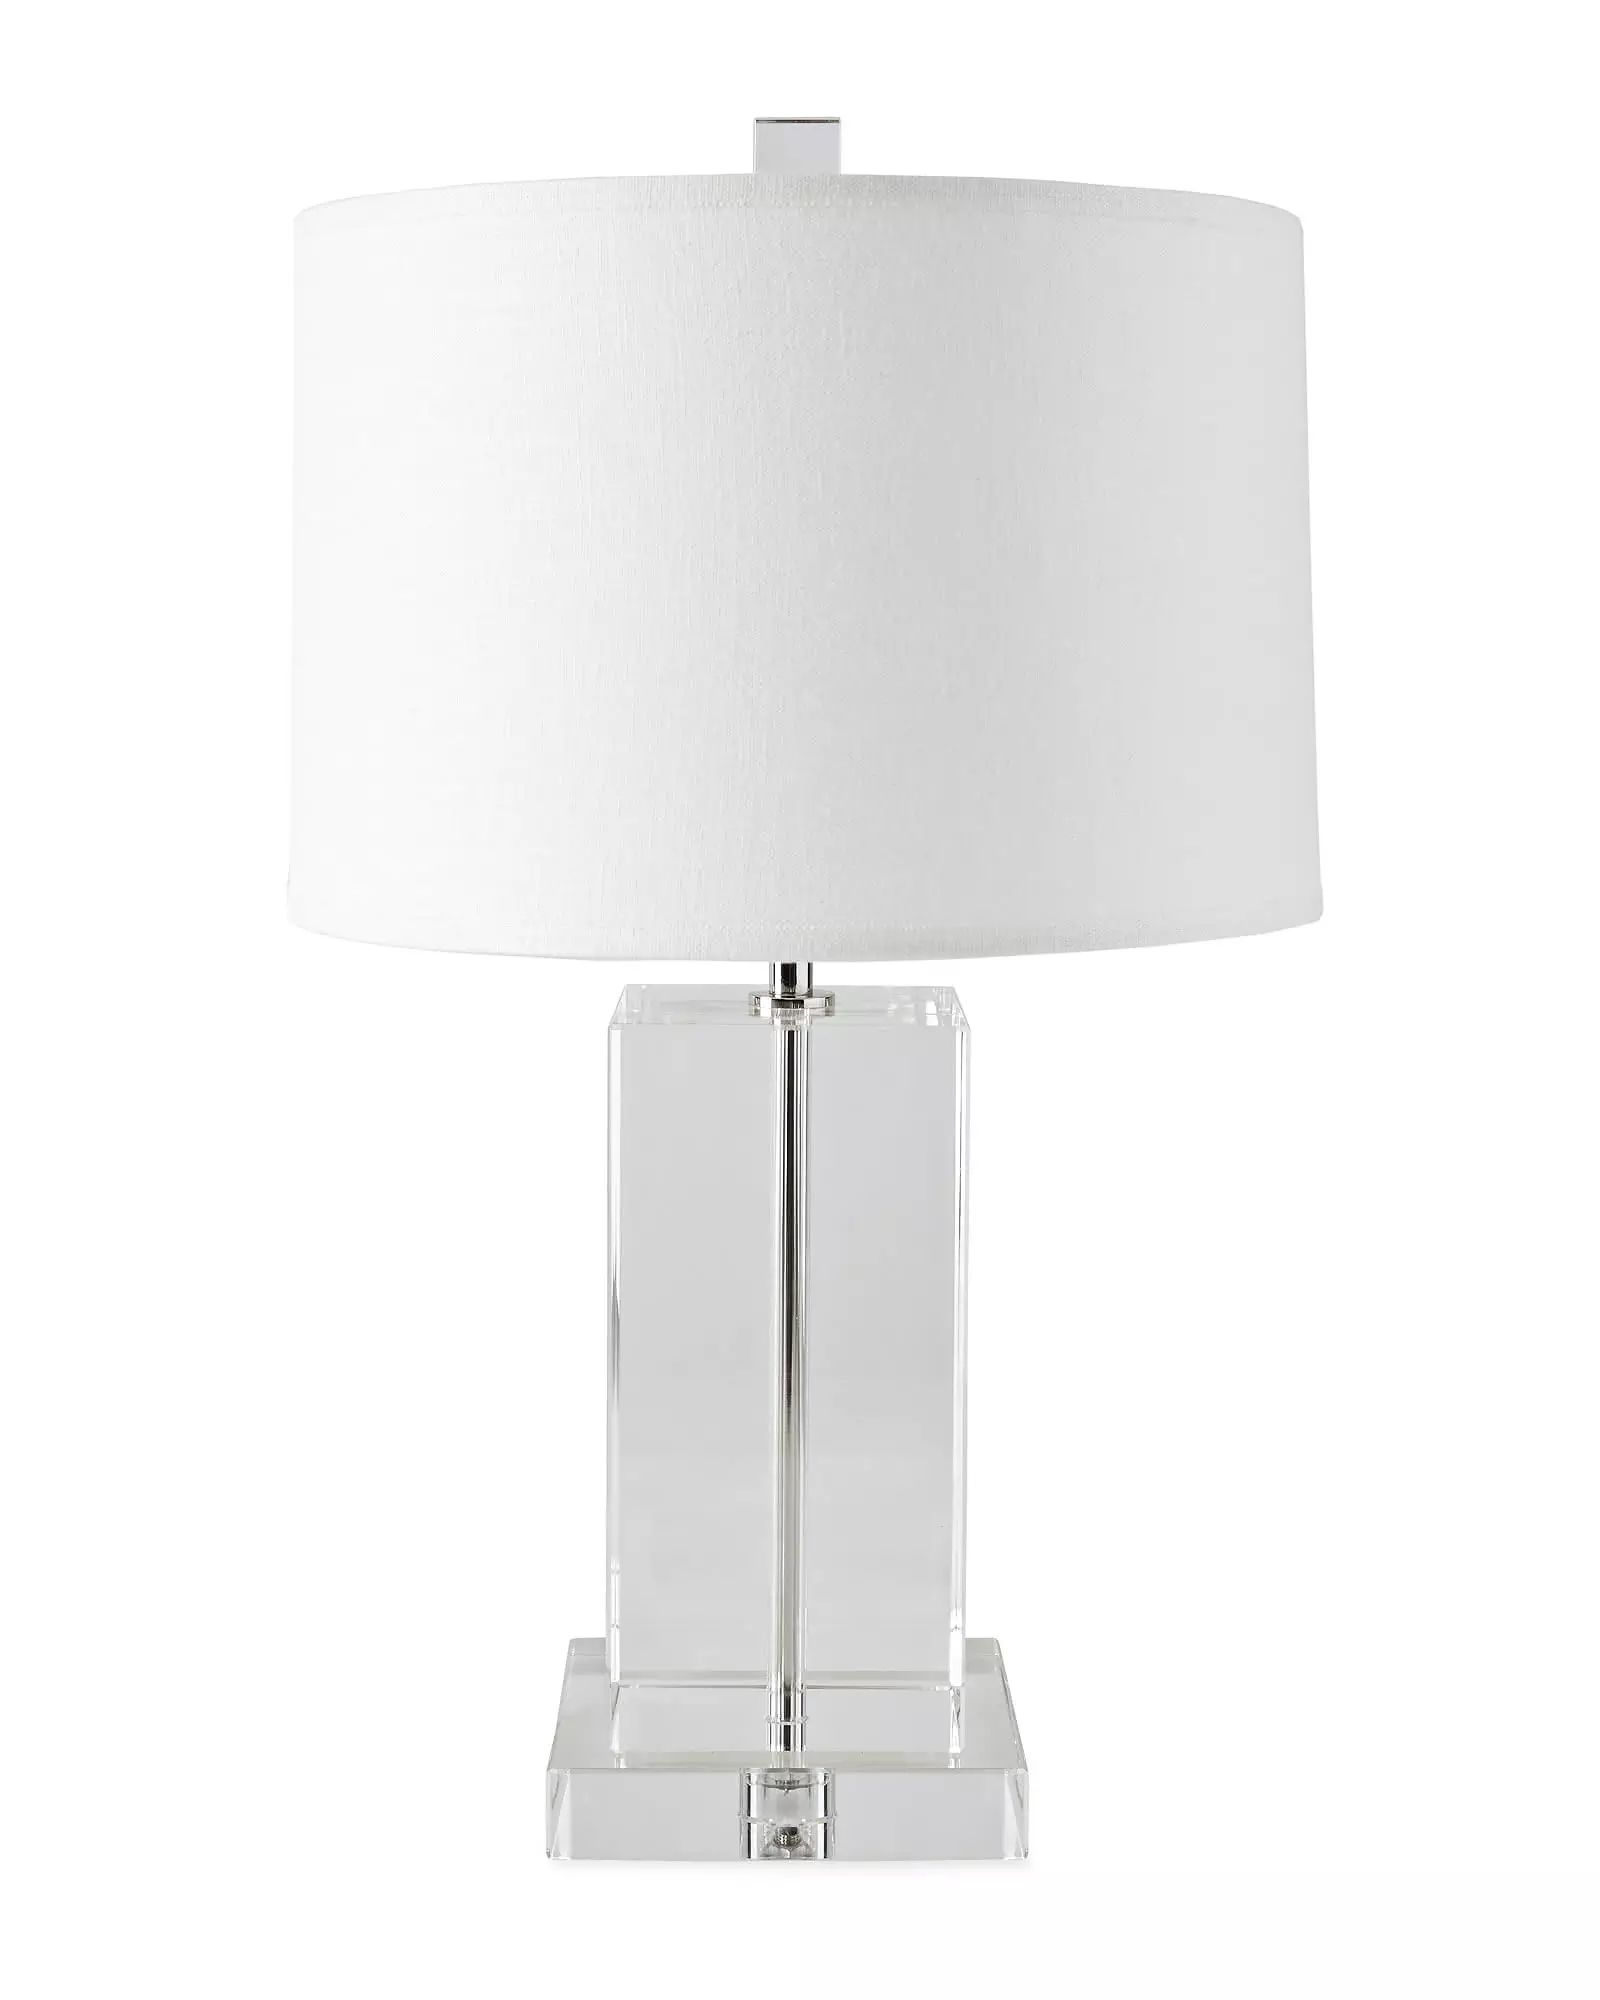 Darby Crystal Table Lamp | Serena and Lily